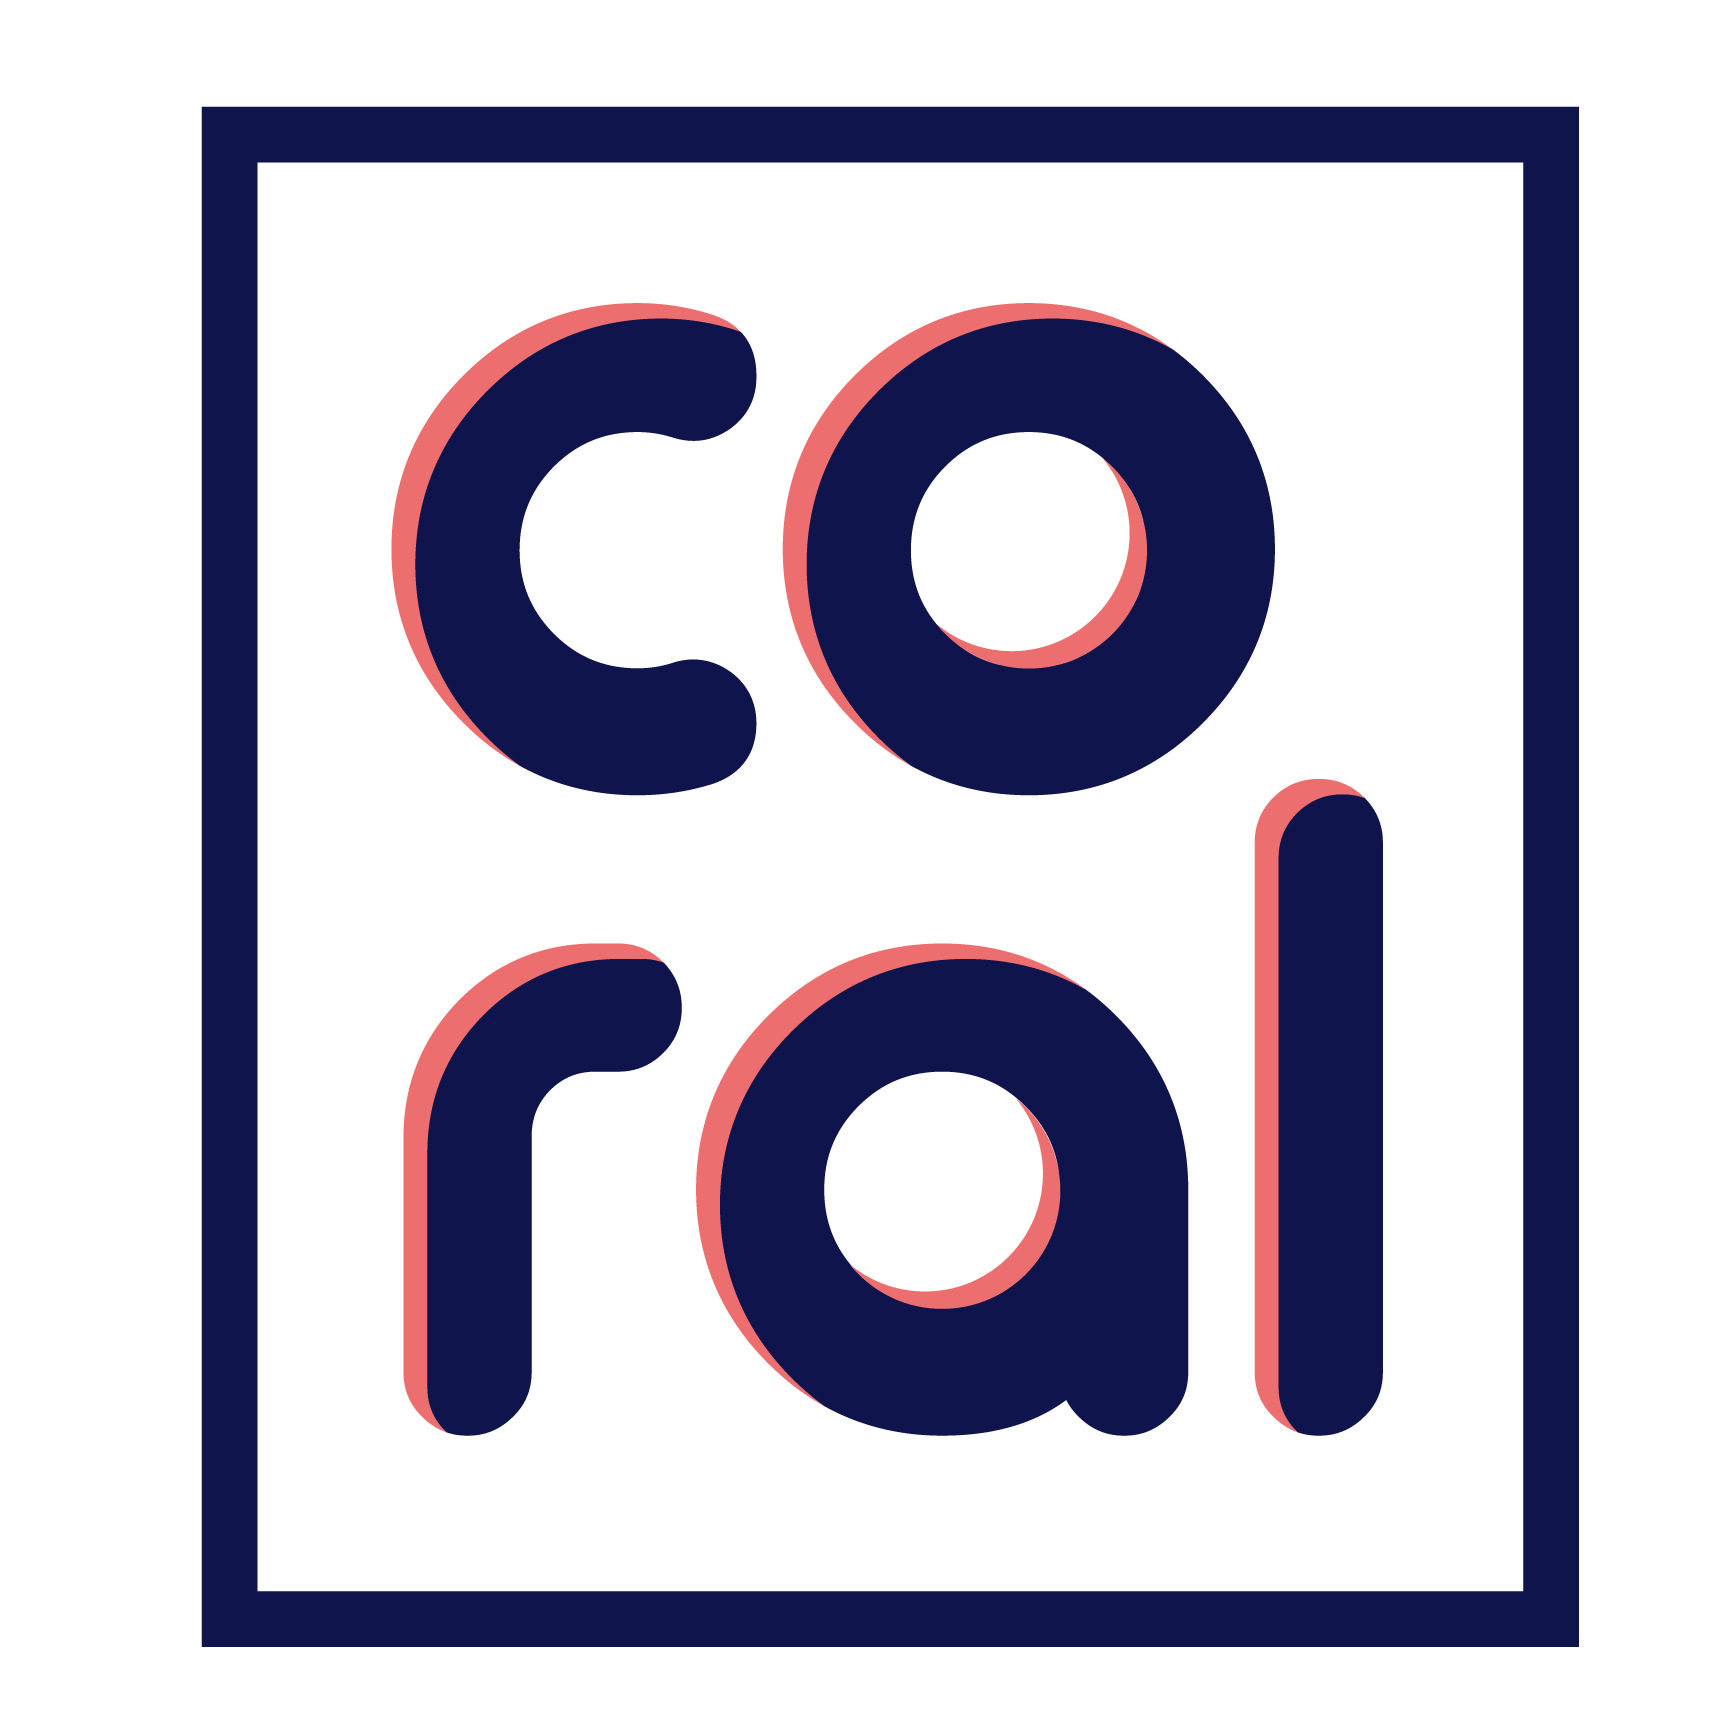 Coral.gdl